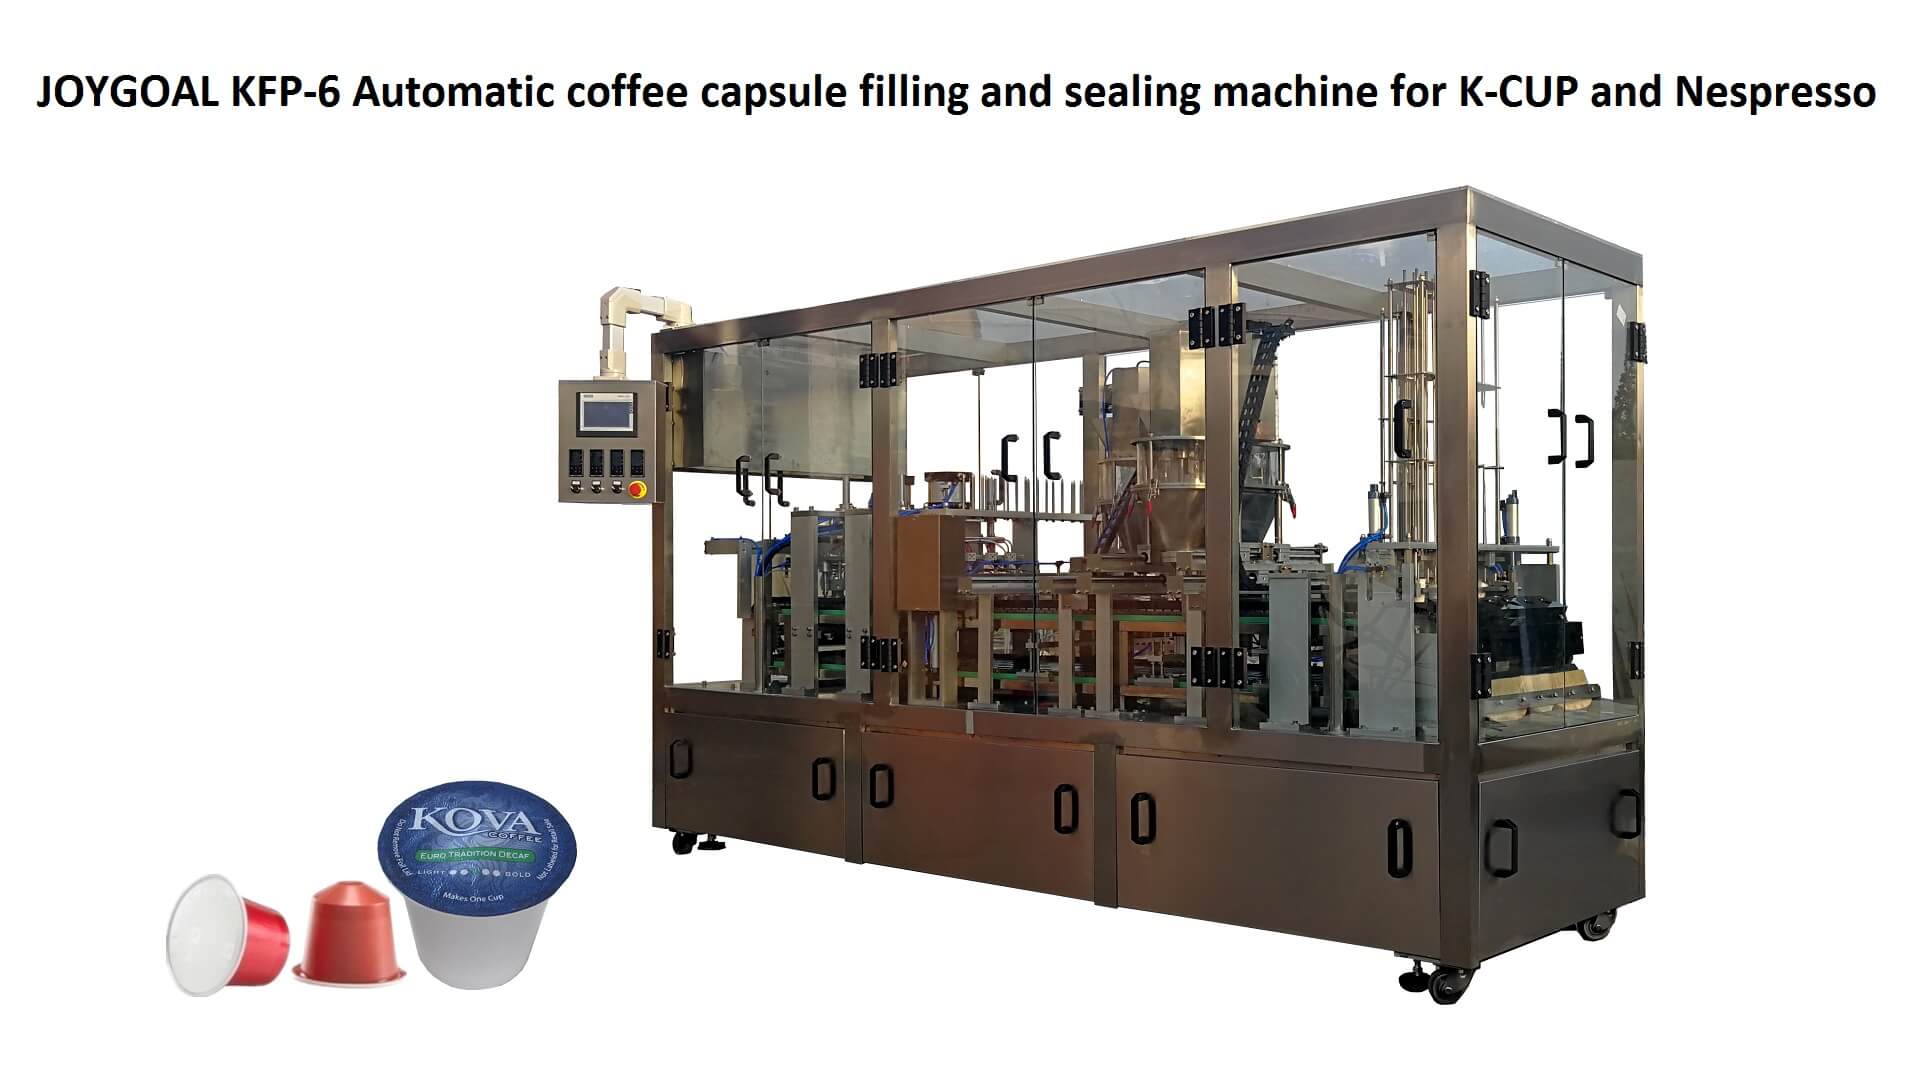 August 12, 2019,JOYGOAL KFP-6 Automatic coffee capsule filling and sealing machi